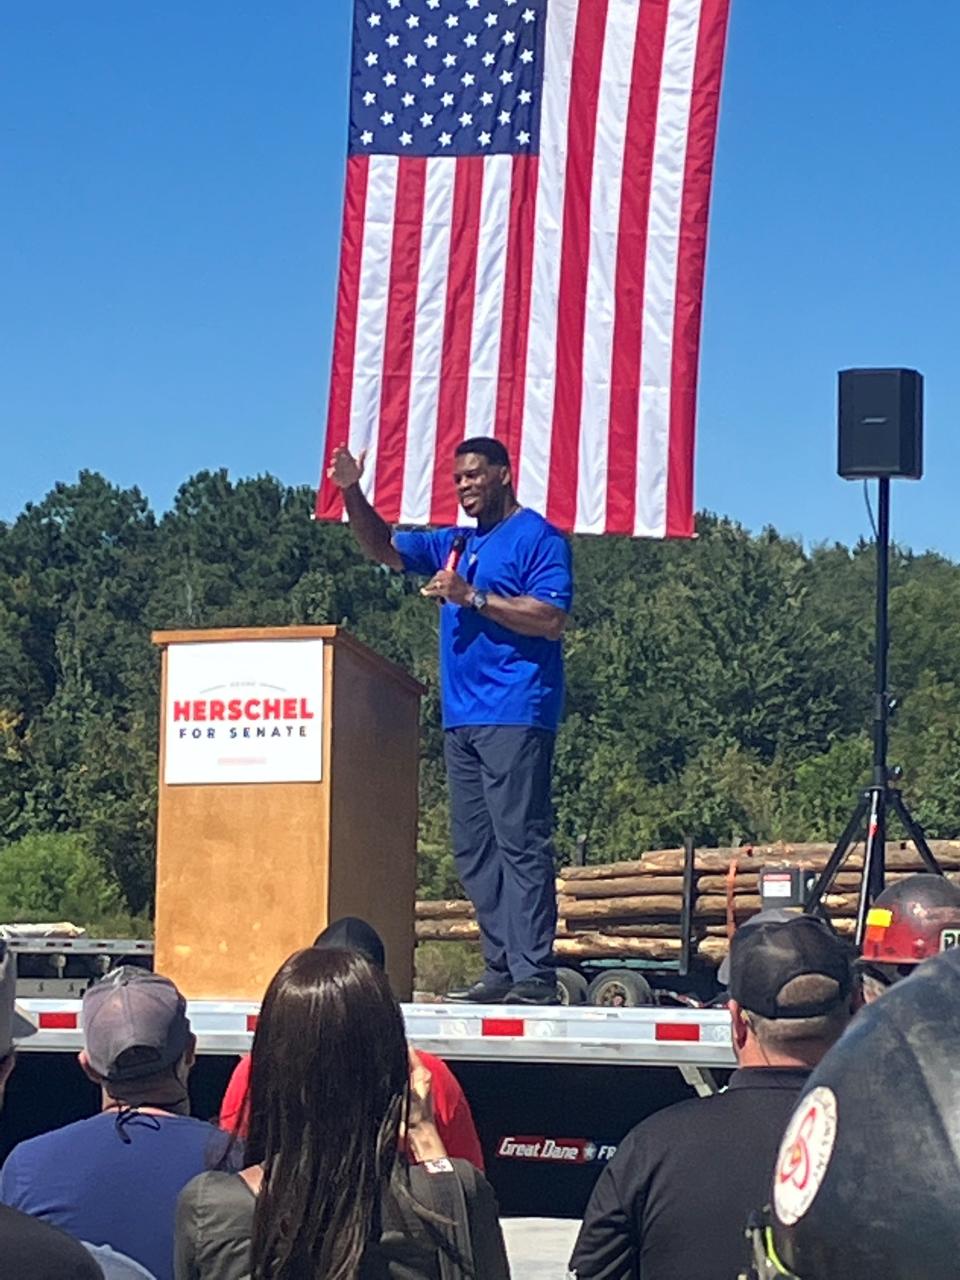 Walker addresses the crowd on Thursday, Oct. 6, in Wadley, Georgia, before speaking briefly with reporters about reporting that he paid for a former girlfriend's abortion.